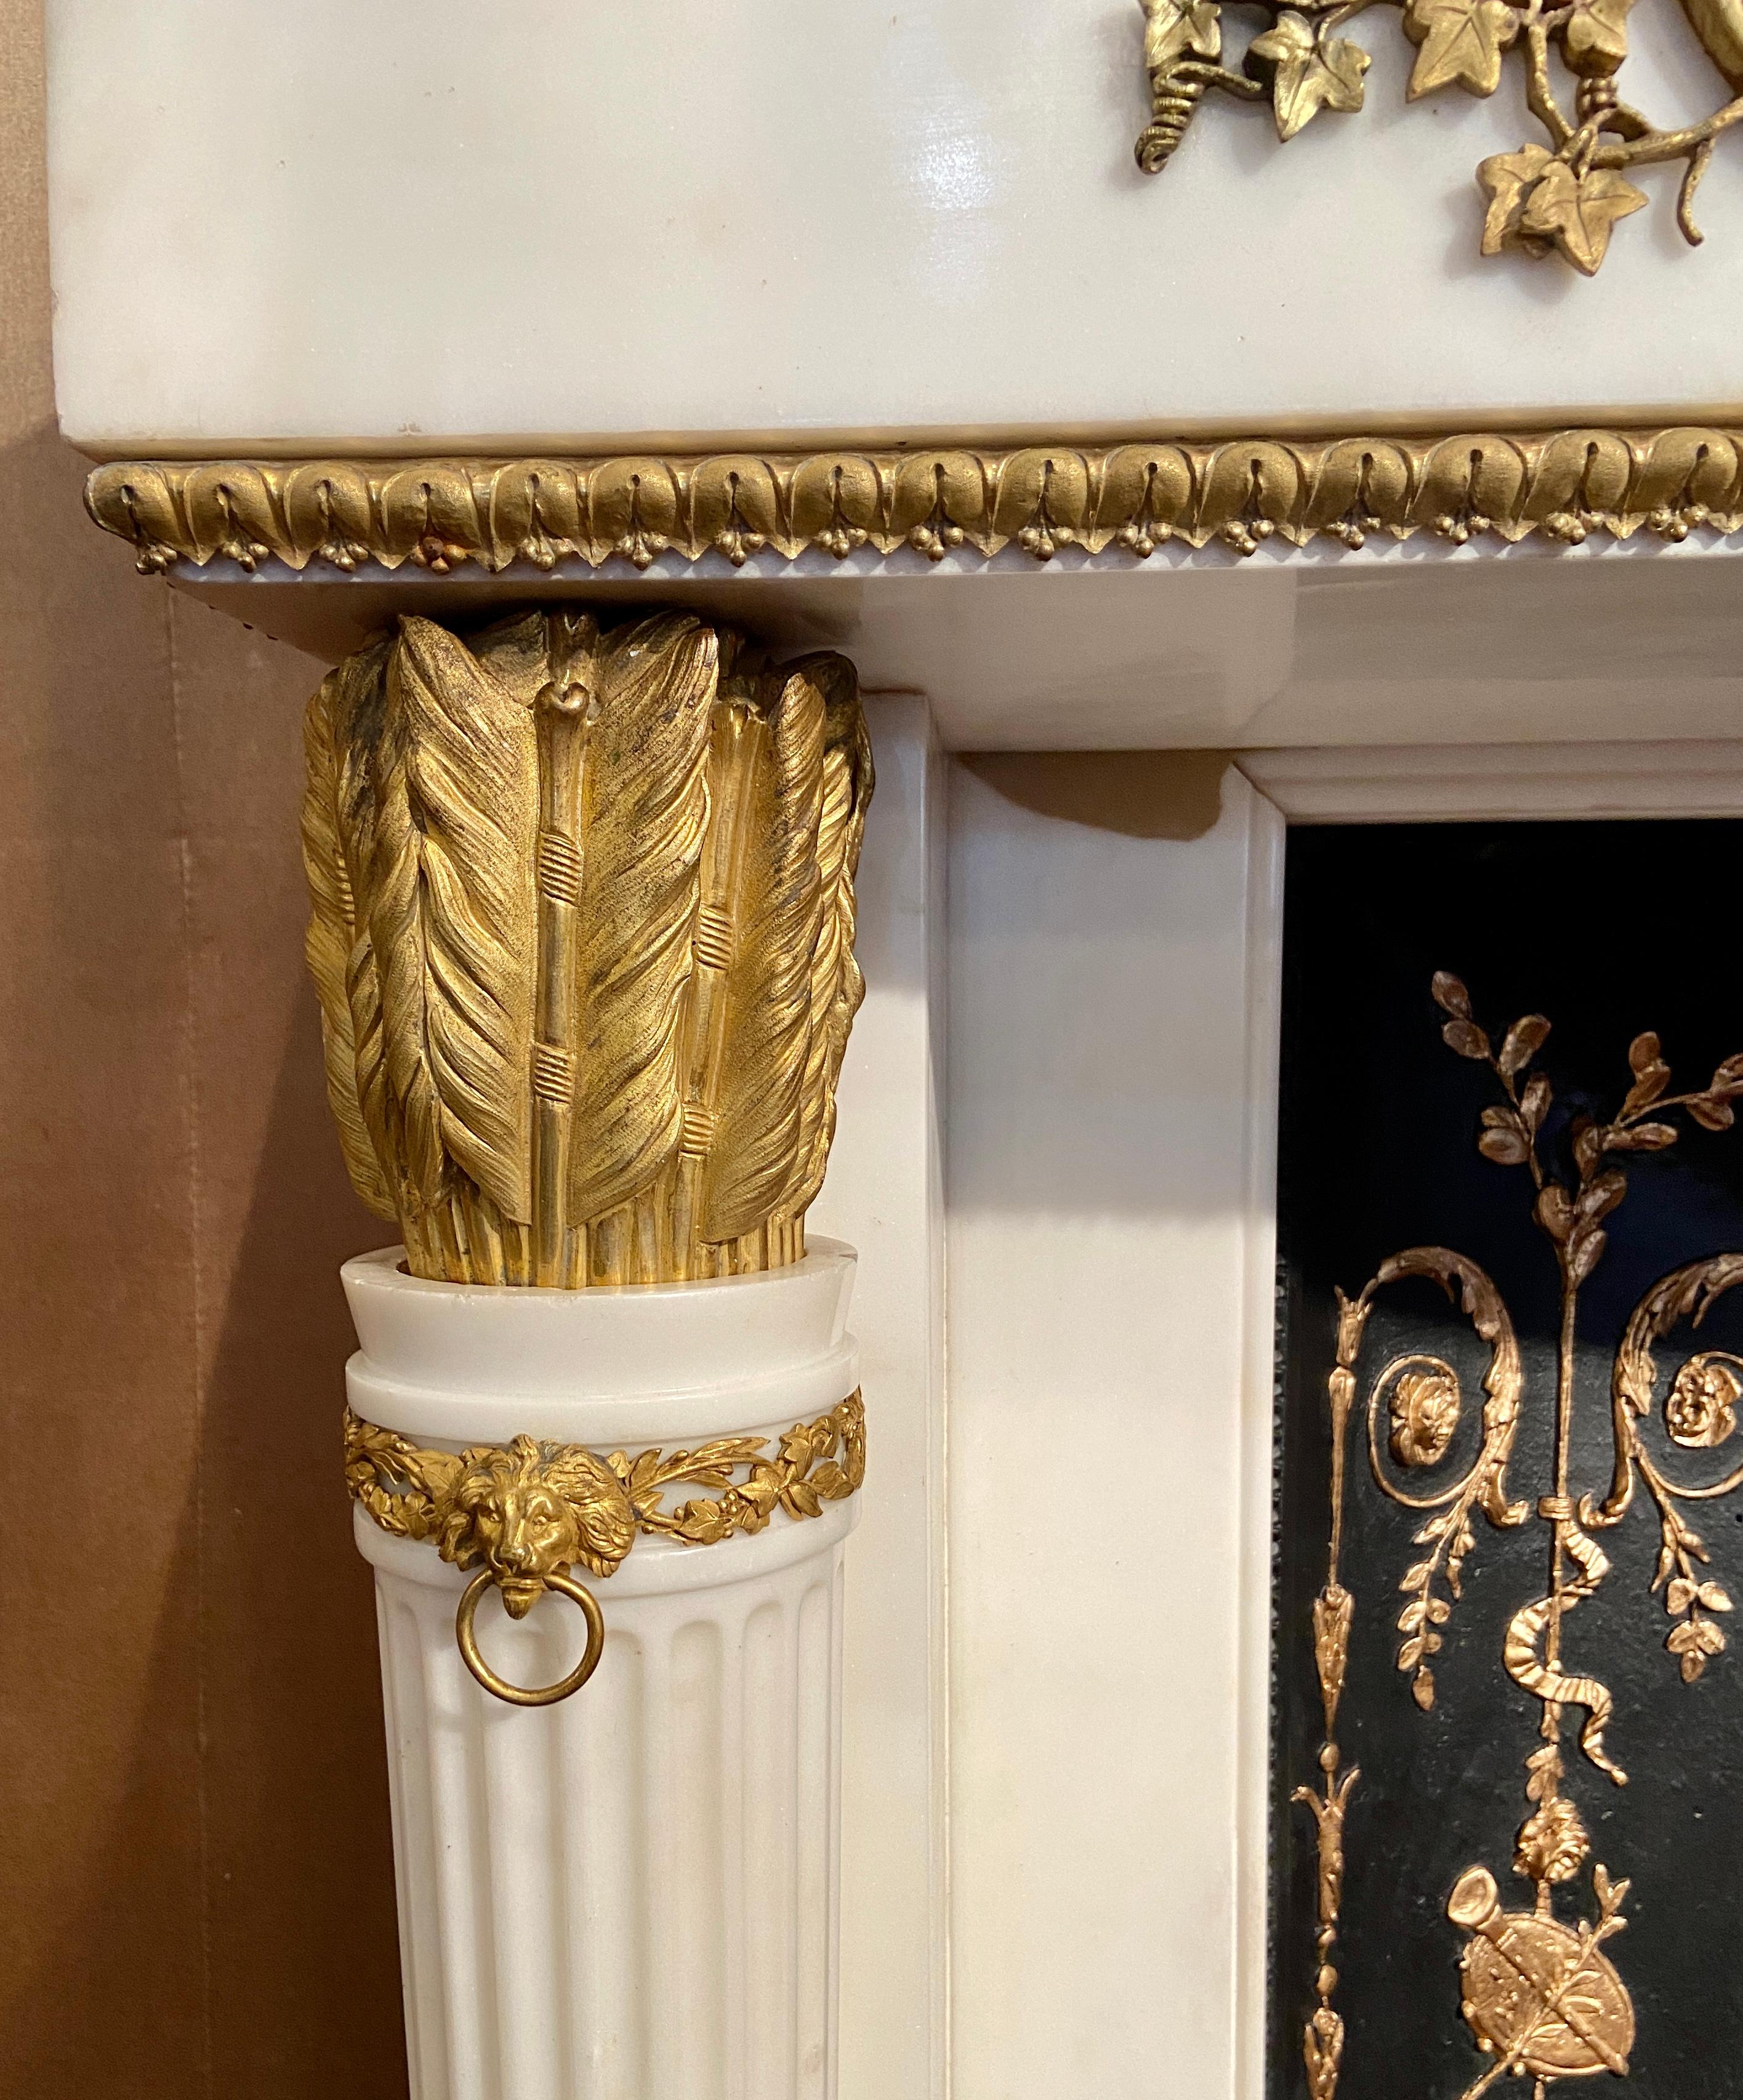 Magnificent antique 19th century French Louis XVI style ormolu mounted marble mantel after the Fireplace in Marie Antoinette’s Silver Boudoir in the Château de Fontainebleau, 1786.
This beautiful mantel is patterned after the original found in